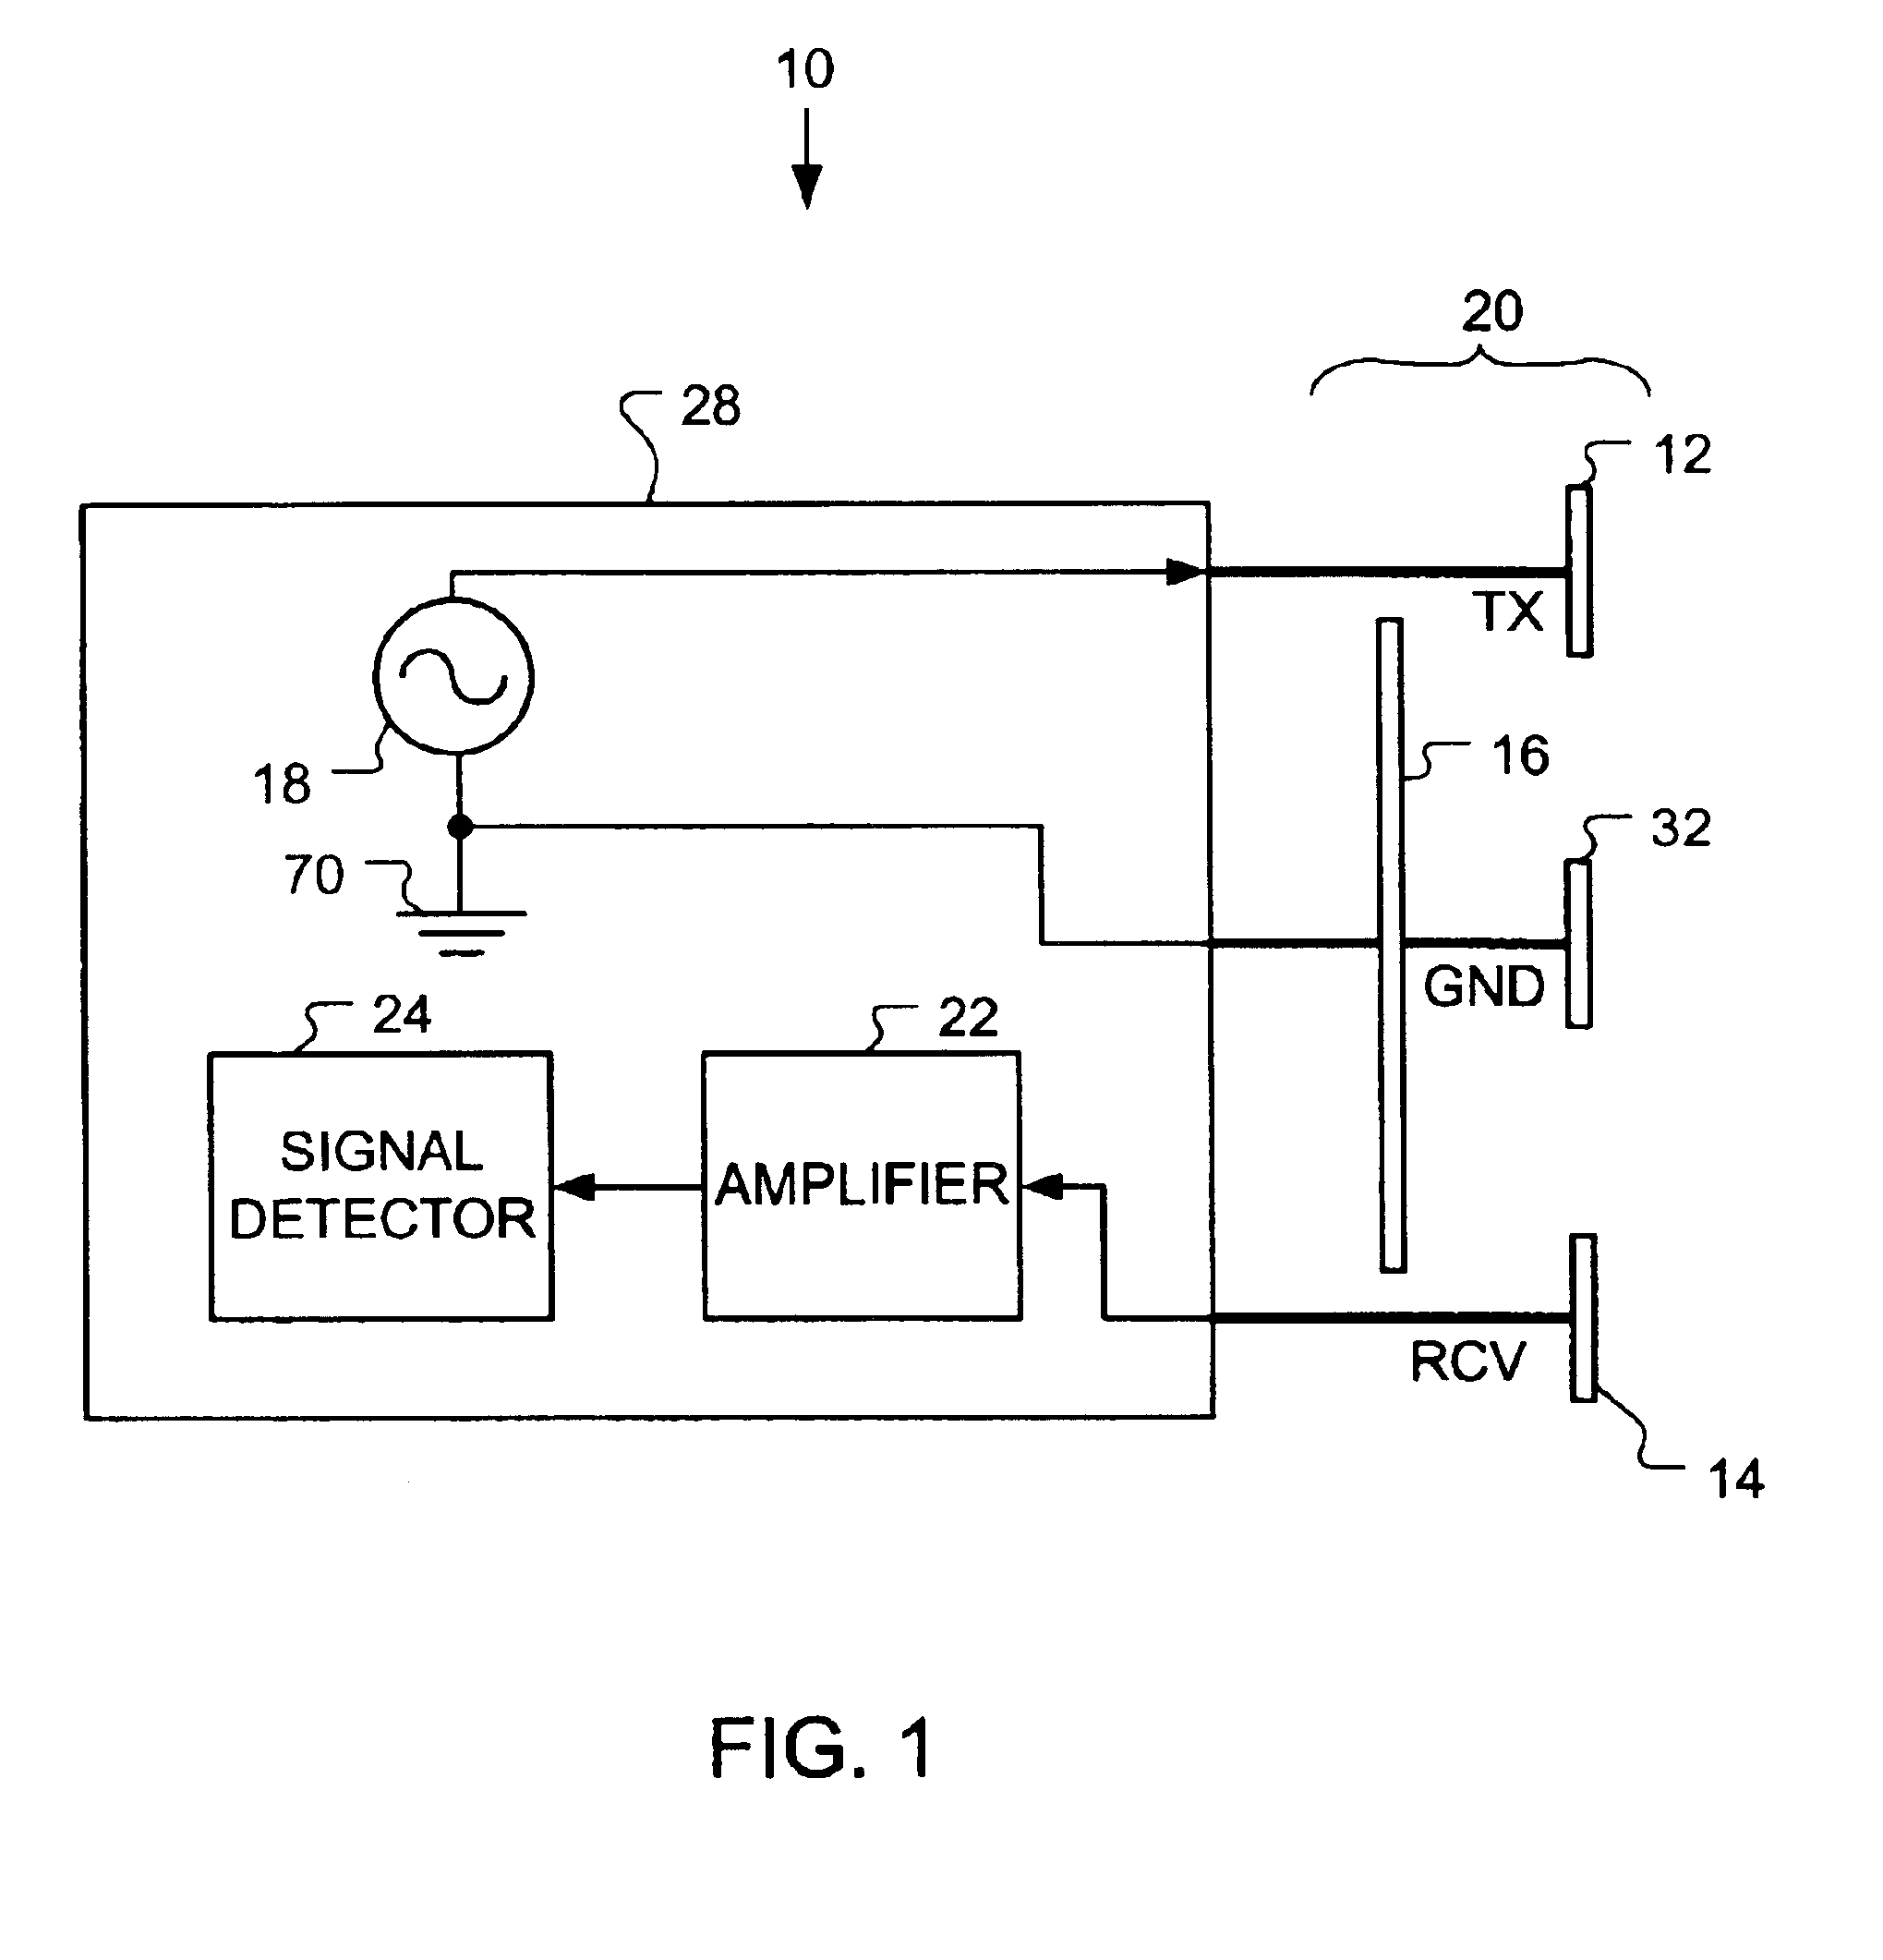 Electric field proximity detector for floating and grounded targets